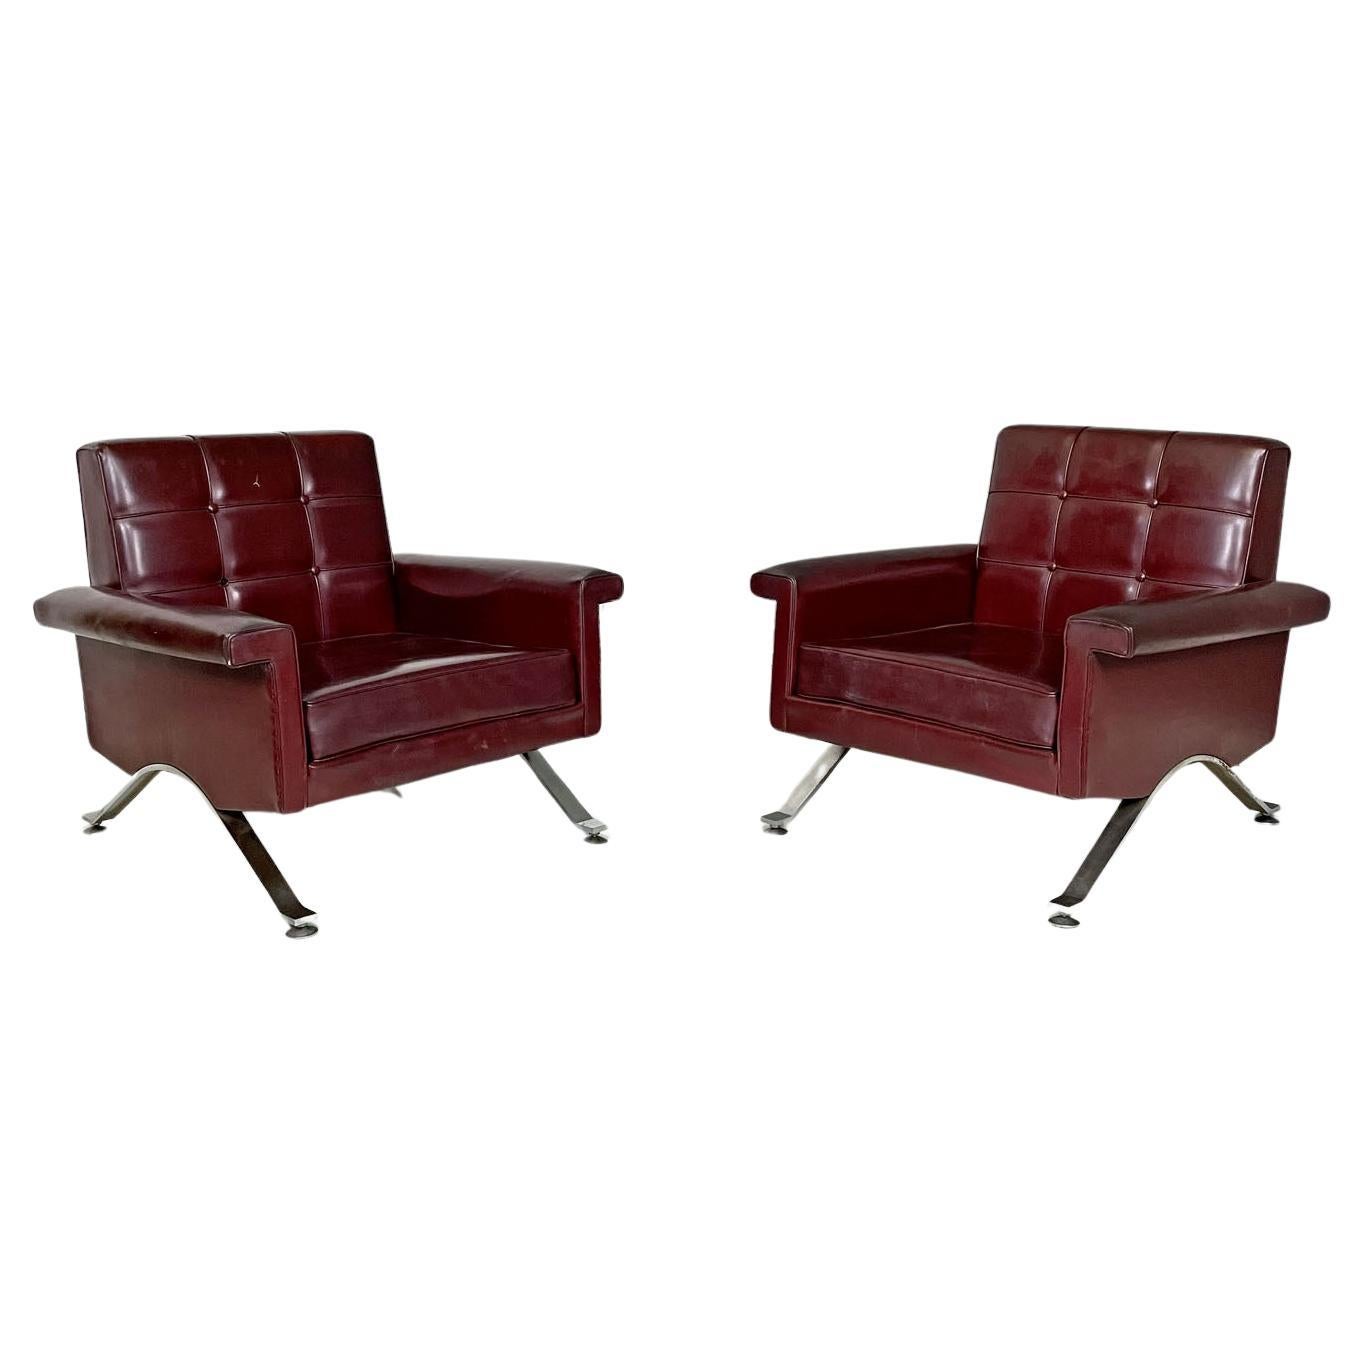 Italian mid-century modern leather armchairs by Ico Parisi for Cassina, 1960s